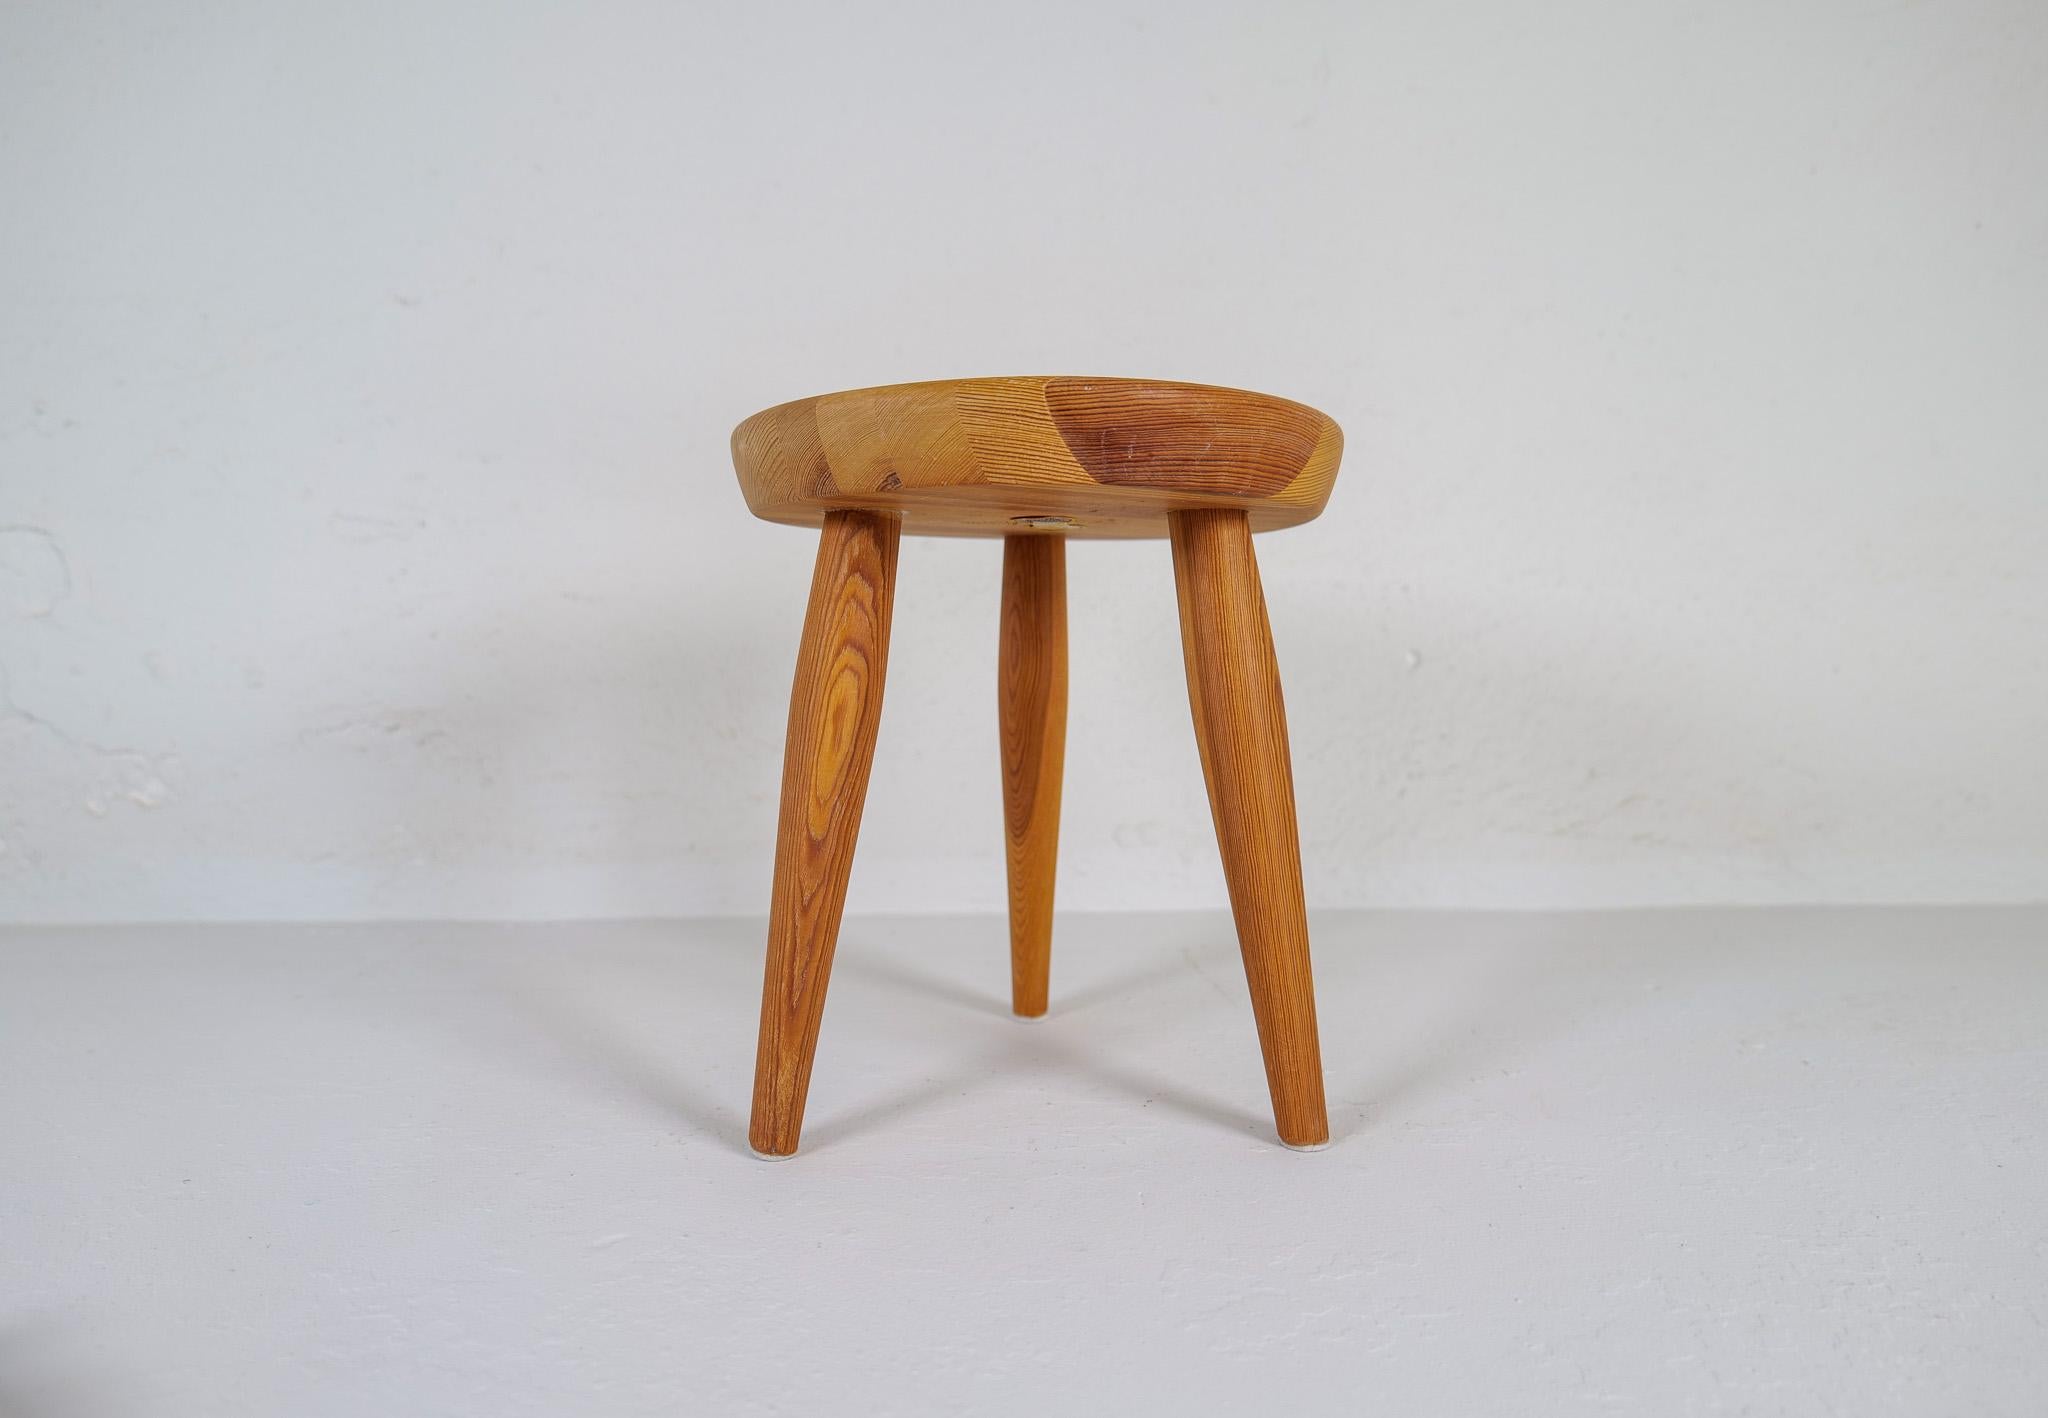 A small sculptural stool in solid pine with complexity in the different colors of the wood.
This stool is a good example of the good craftsmanship and minimalistic stile to come in Scandinavian furniture. 

Good original condition with a